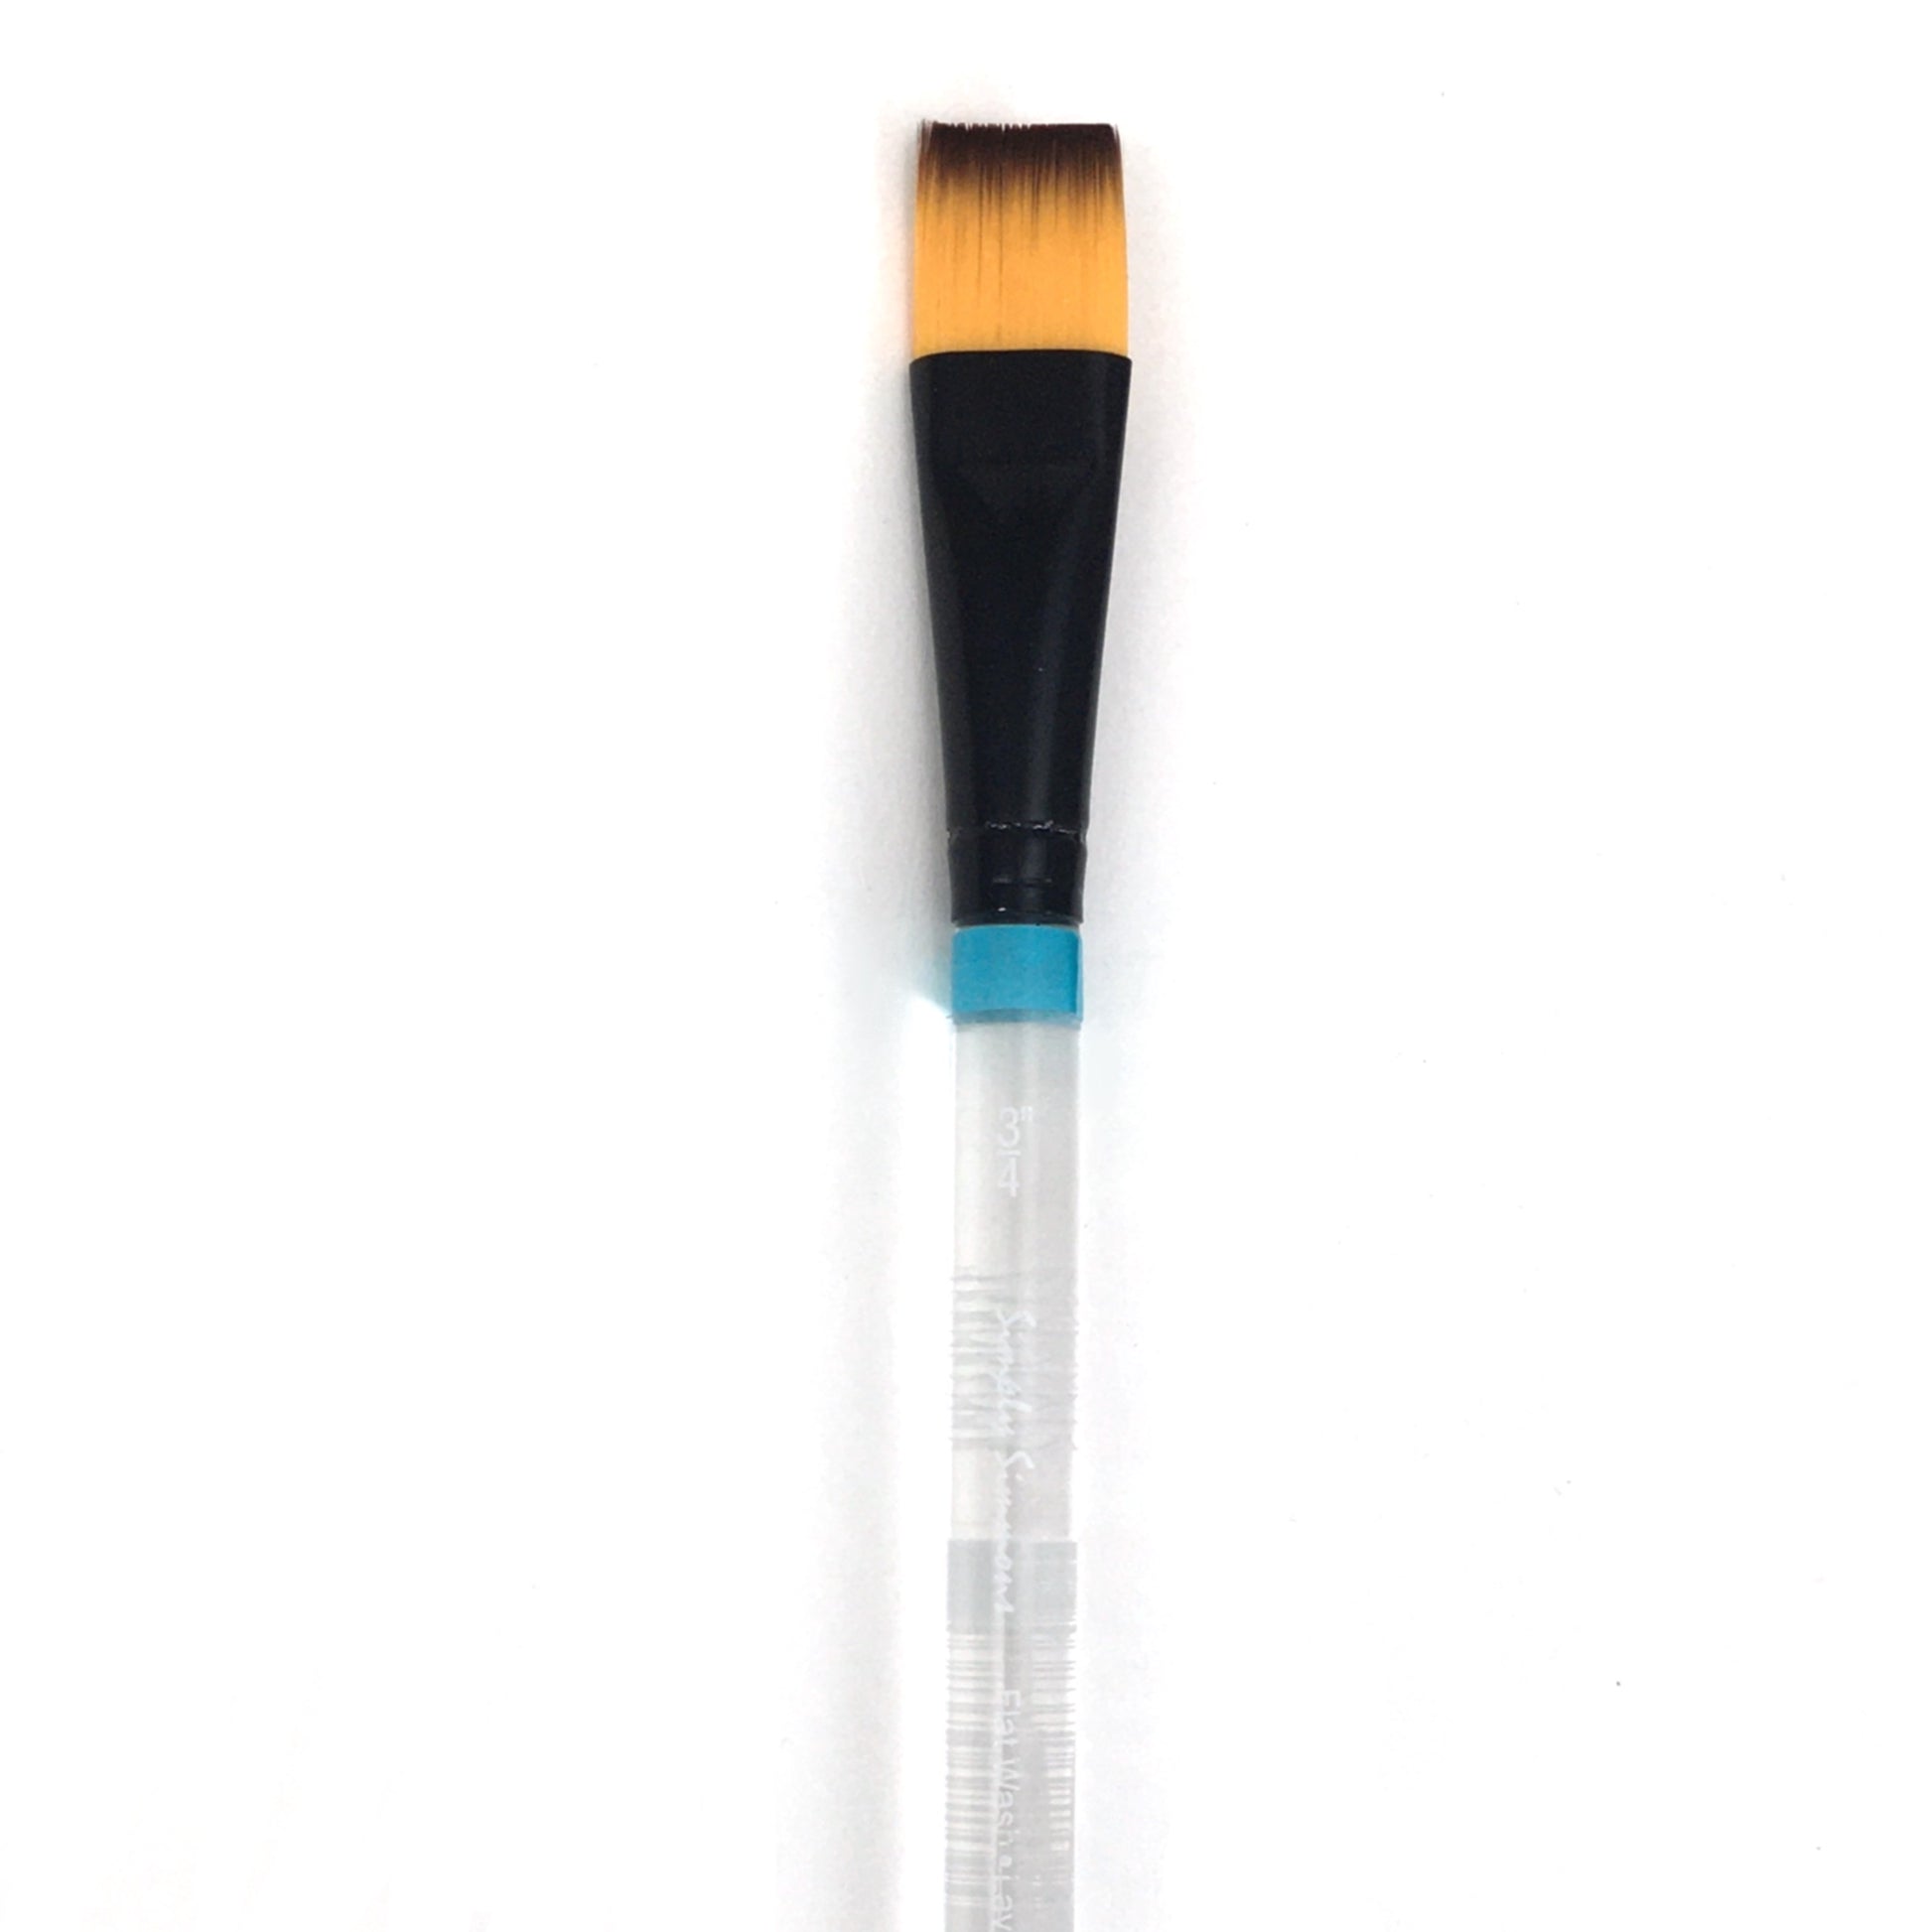 Simply Simmons Watercolor Brush - Short Handle - Flat Wash / - 3/4 inches / - synthetic by Robert Simmons - K. A. Artist Shop